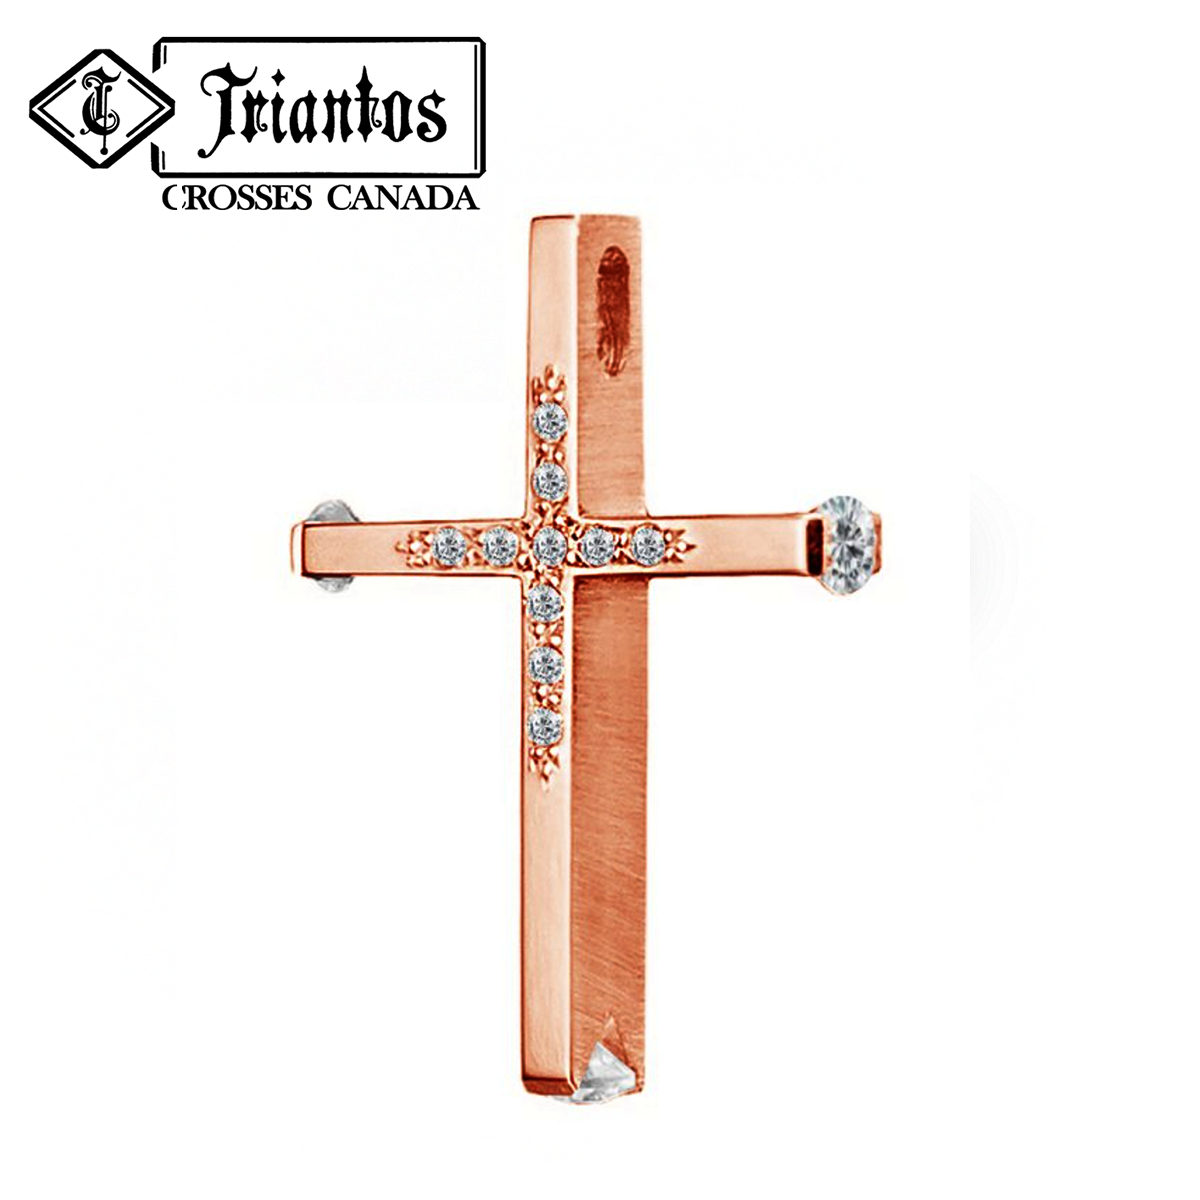  cubic zirconia stones on the edges of 3 corners of the cross, representing the Holly Trinity and a beautiful stone cross design in the middle. 